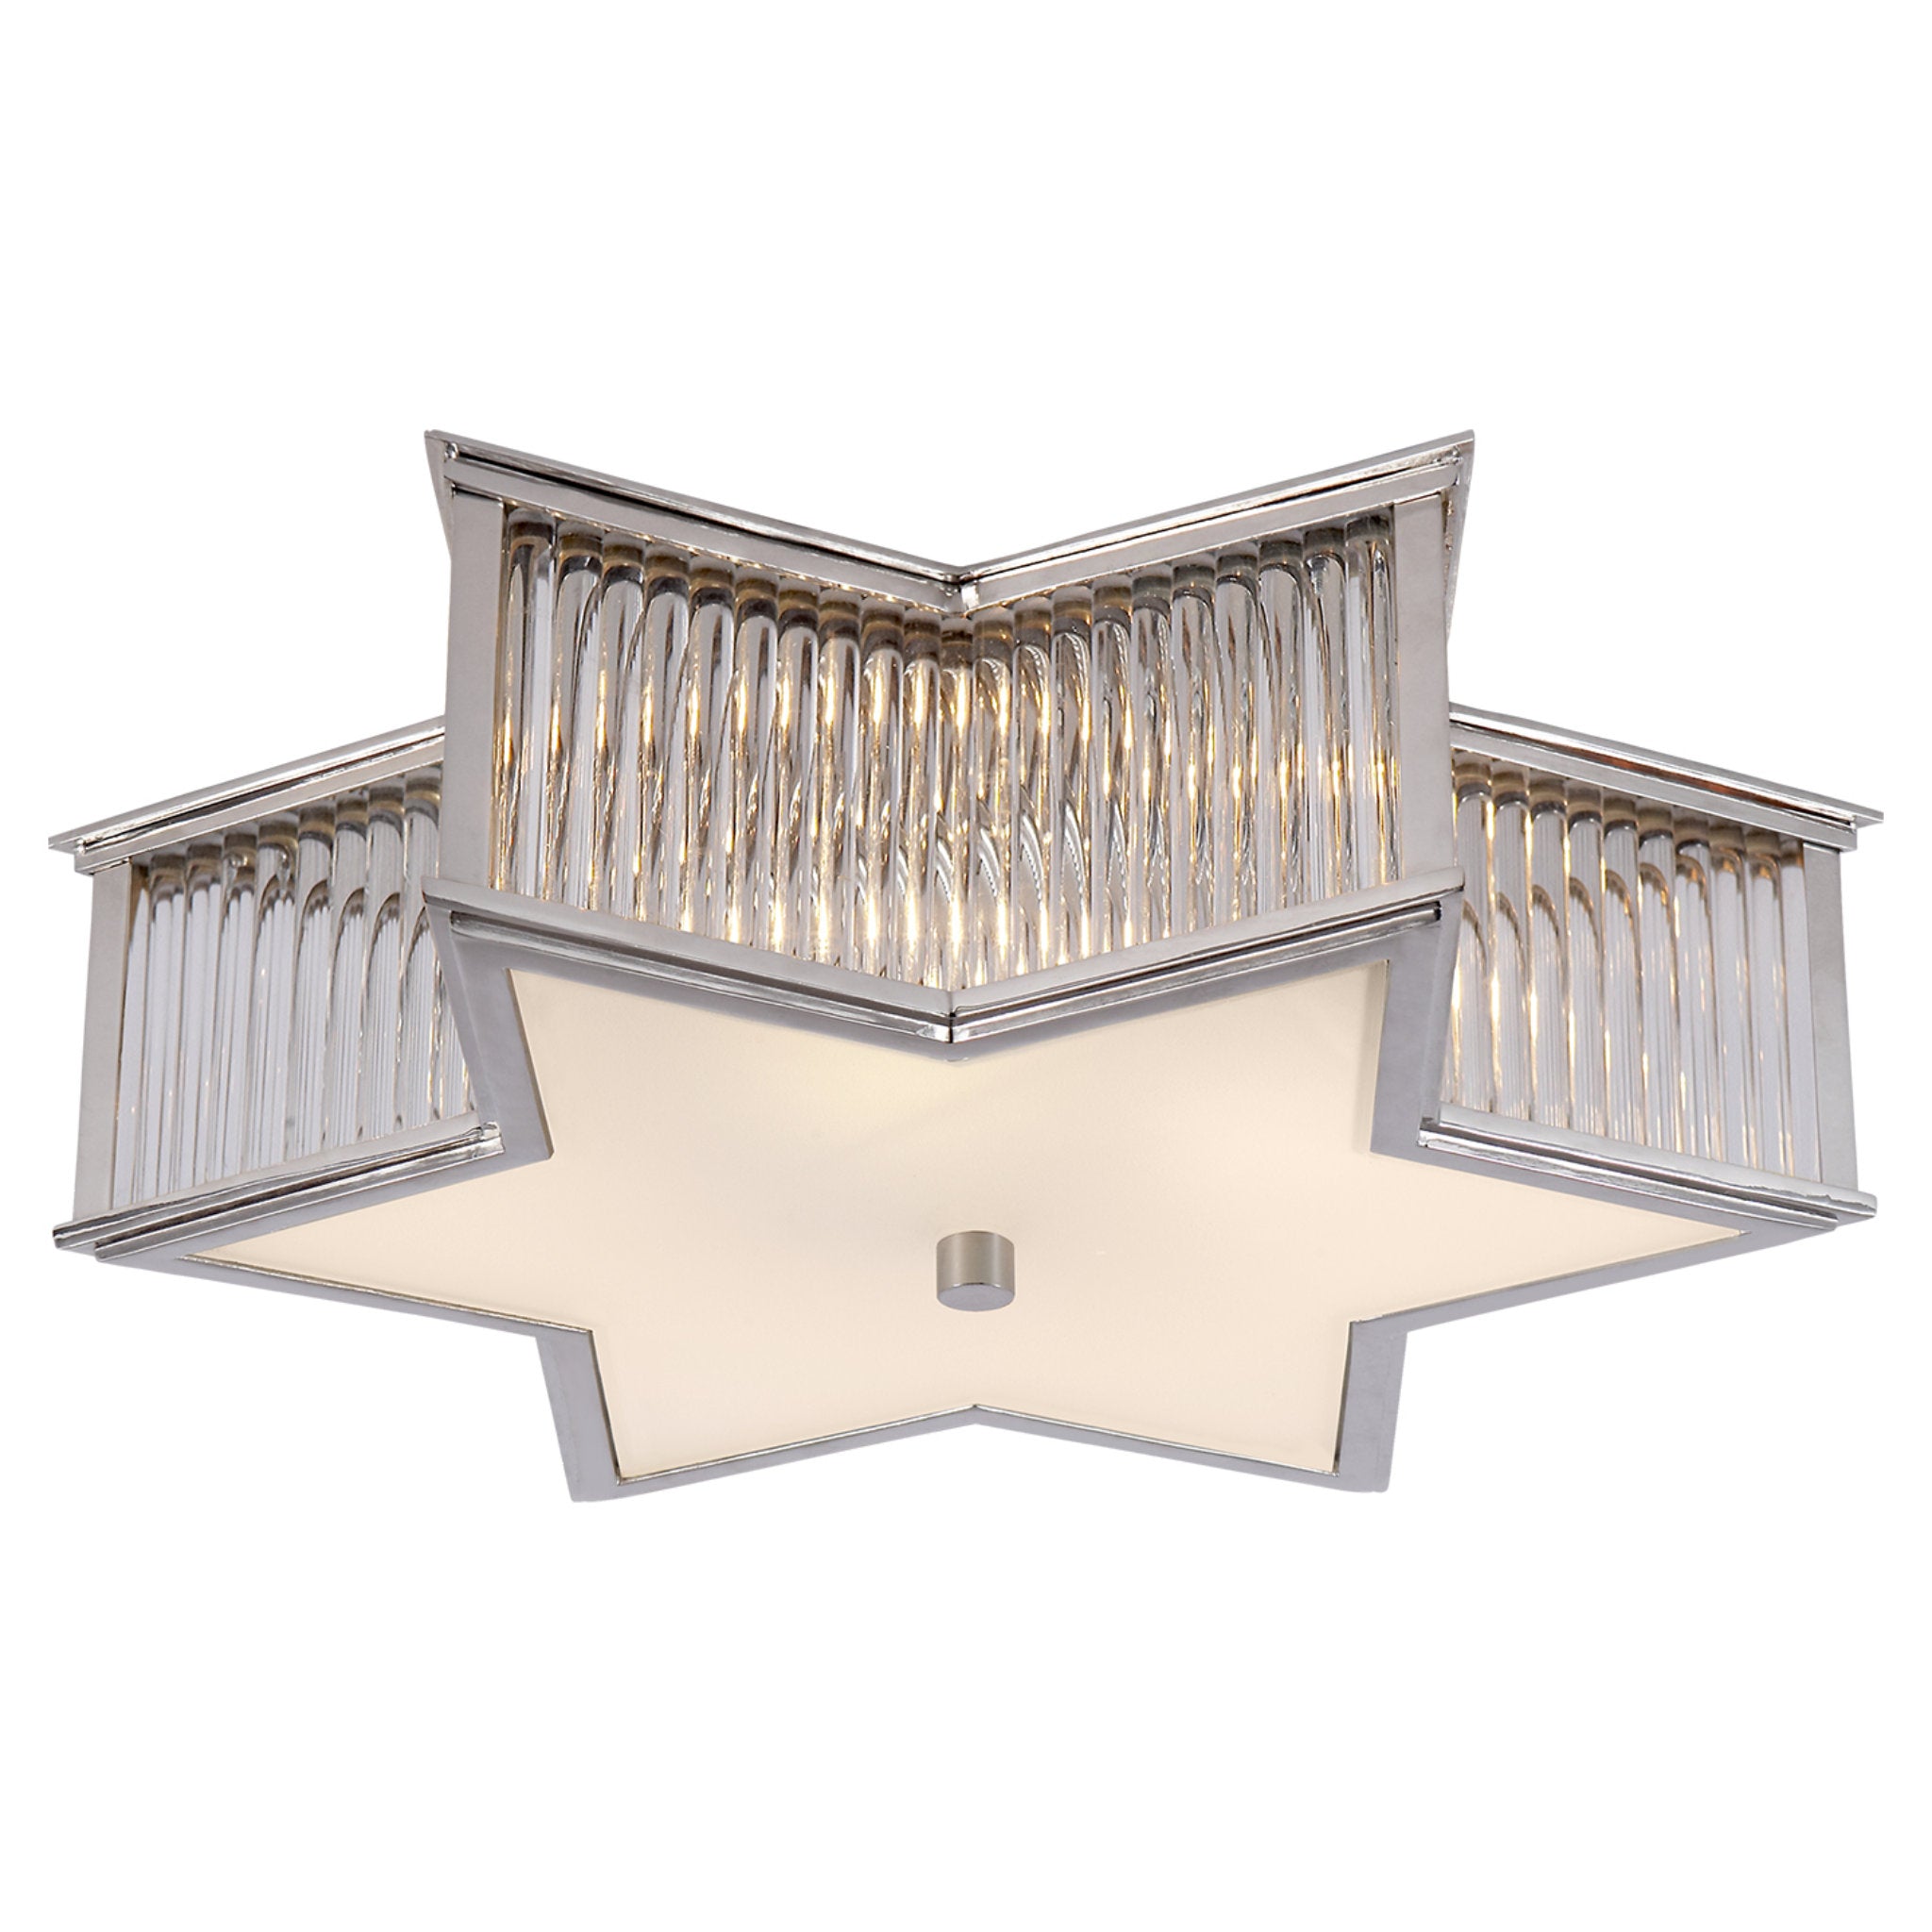 Alexa Hampton Sophia 17" Flush Mount in Polished Nickel and Clear Glass Rods with Frosted Glass